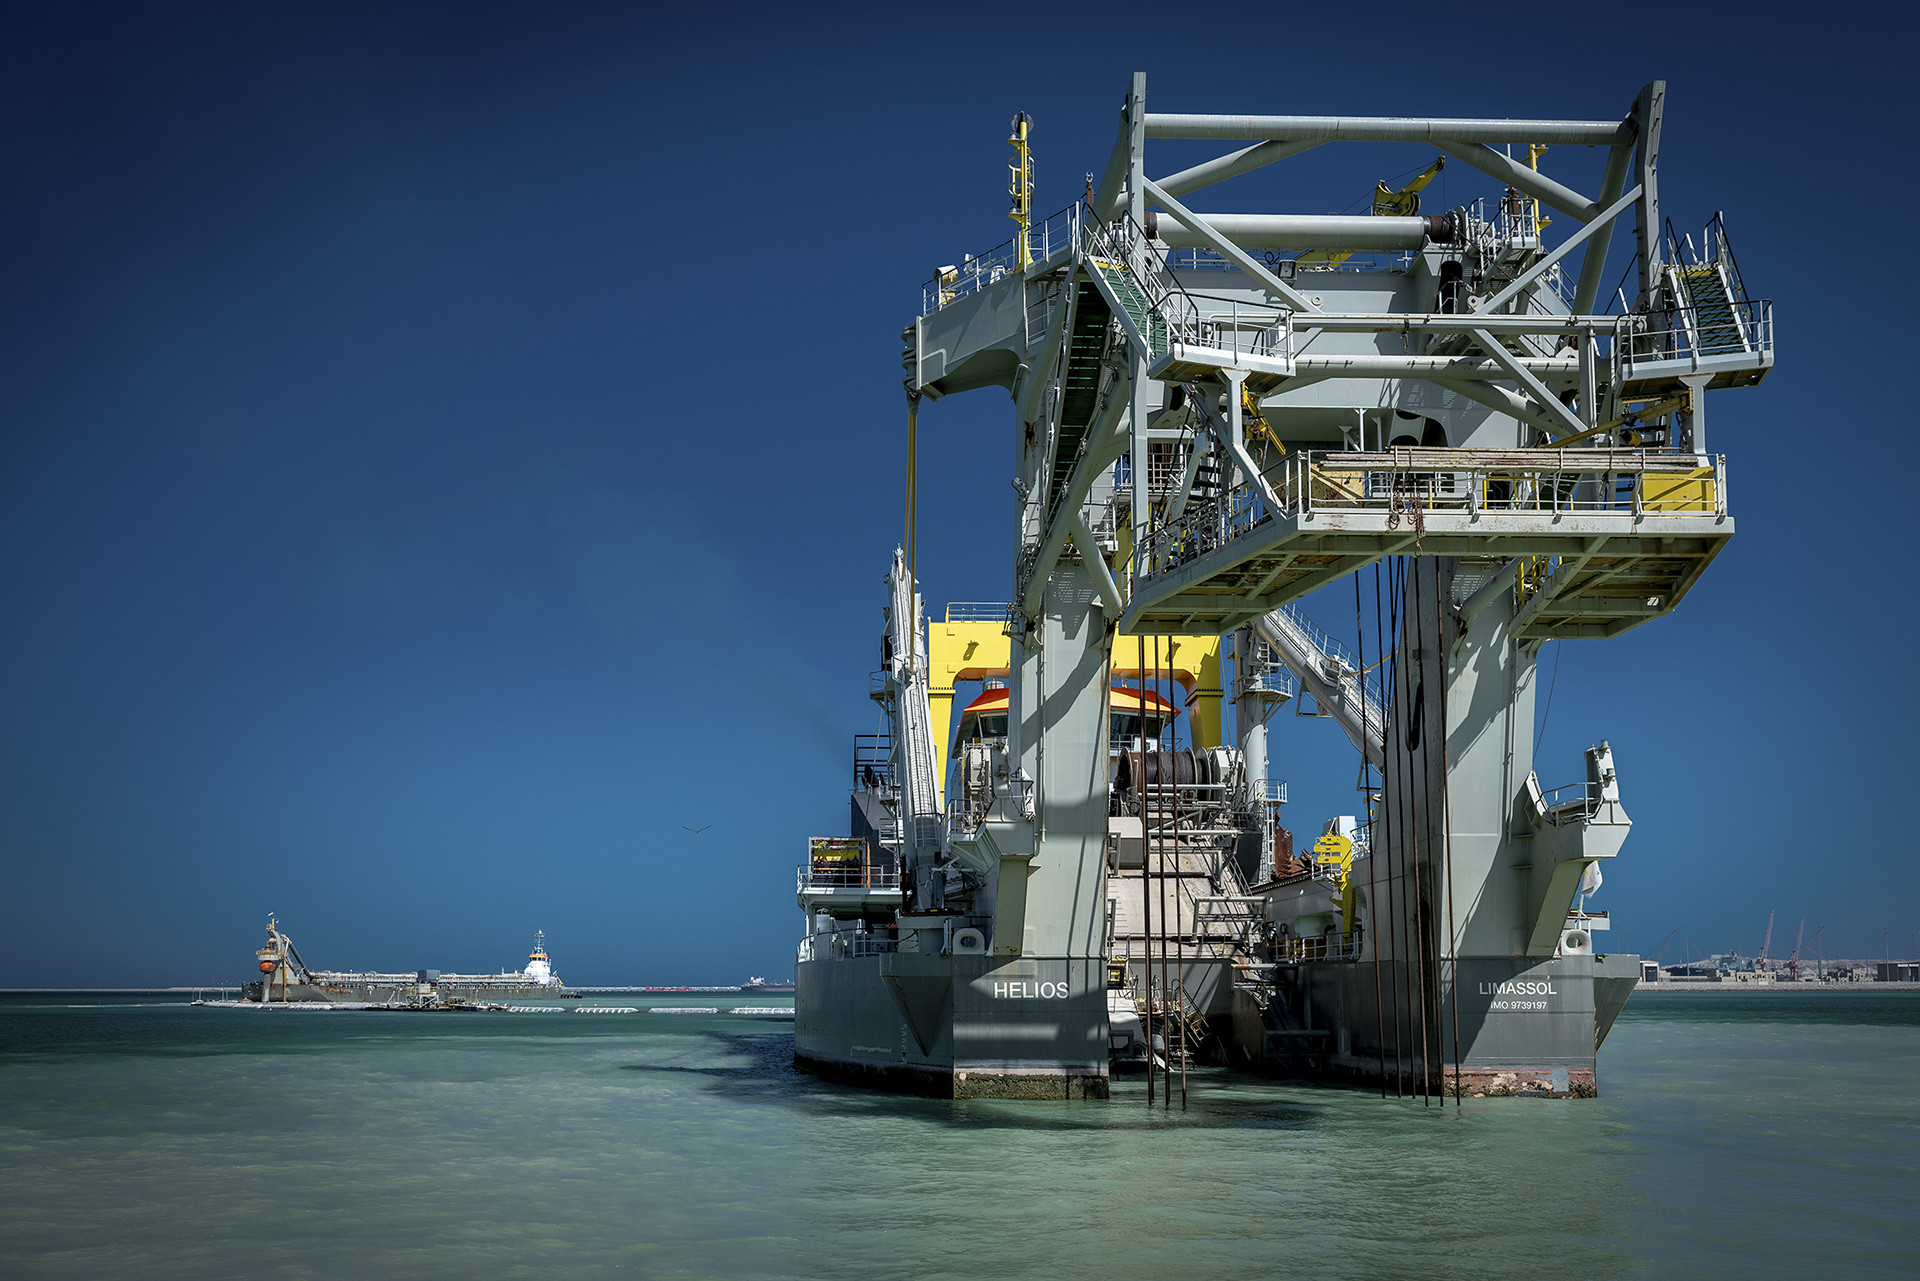 The mega-cutter Helios – one of the industry’s most powerful cutter suction dredgers